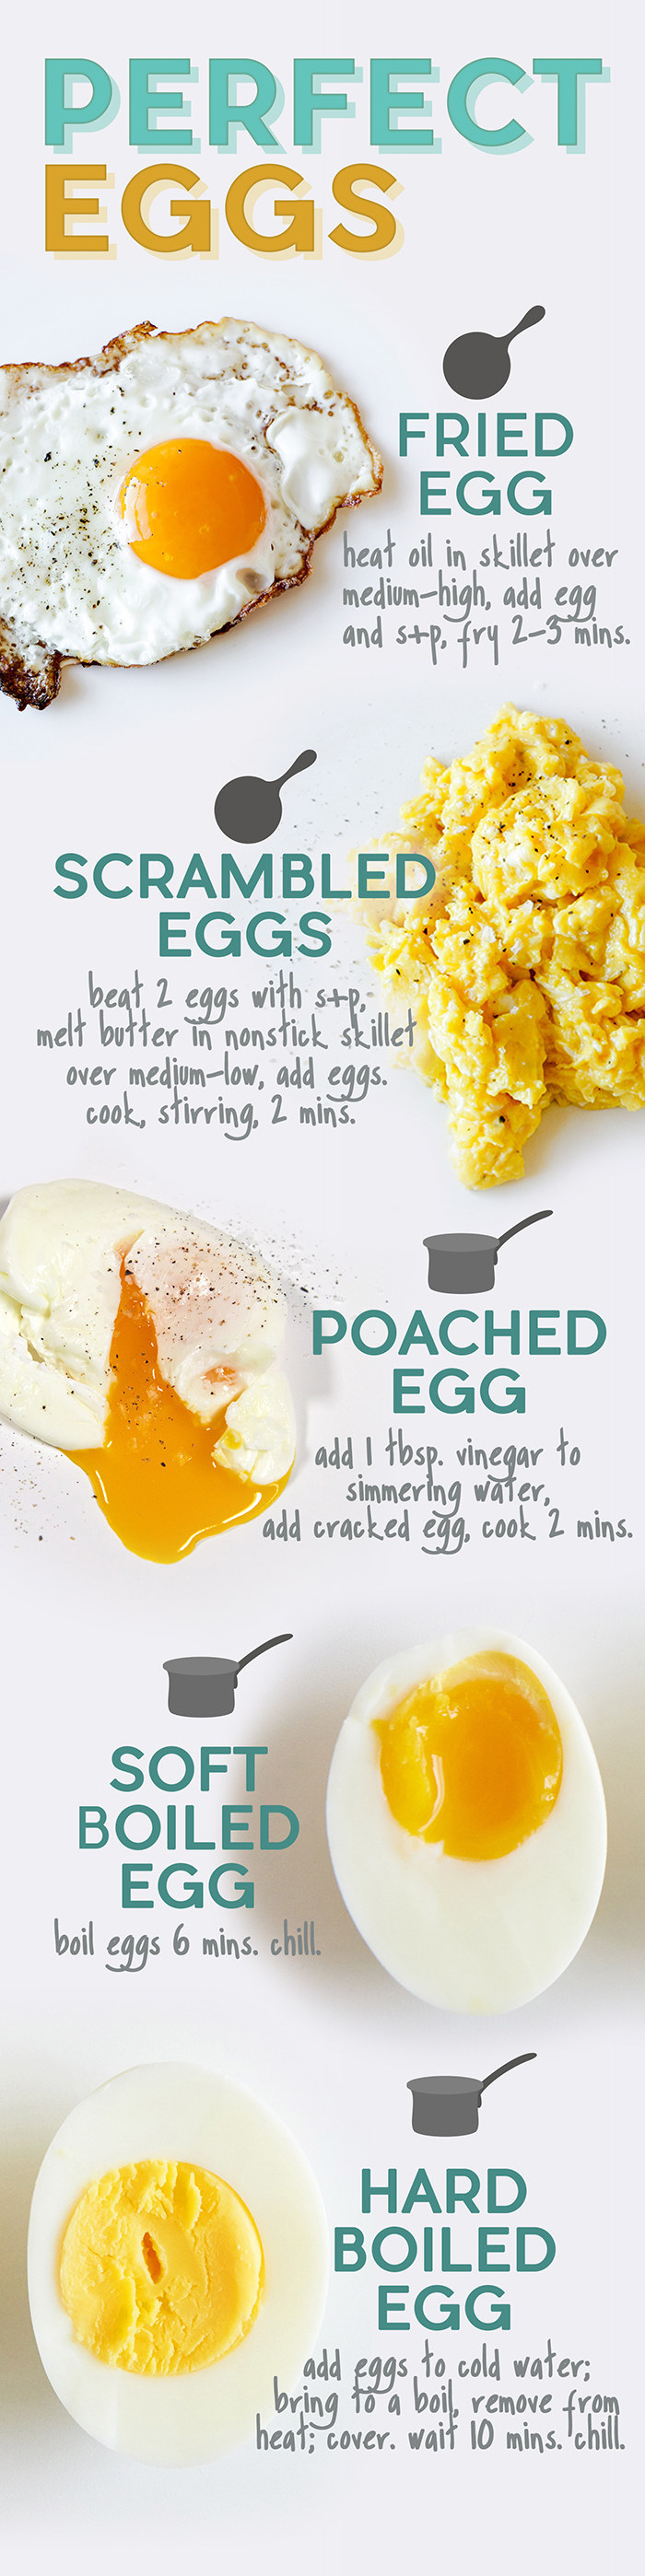 How To Cook Over Easy Eggs [With Video + Infographic]